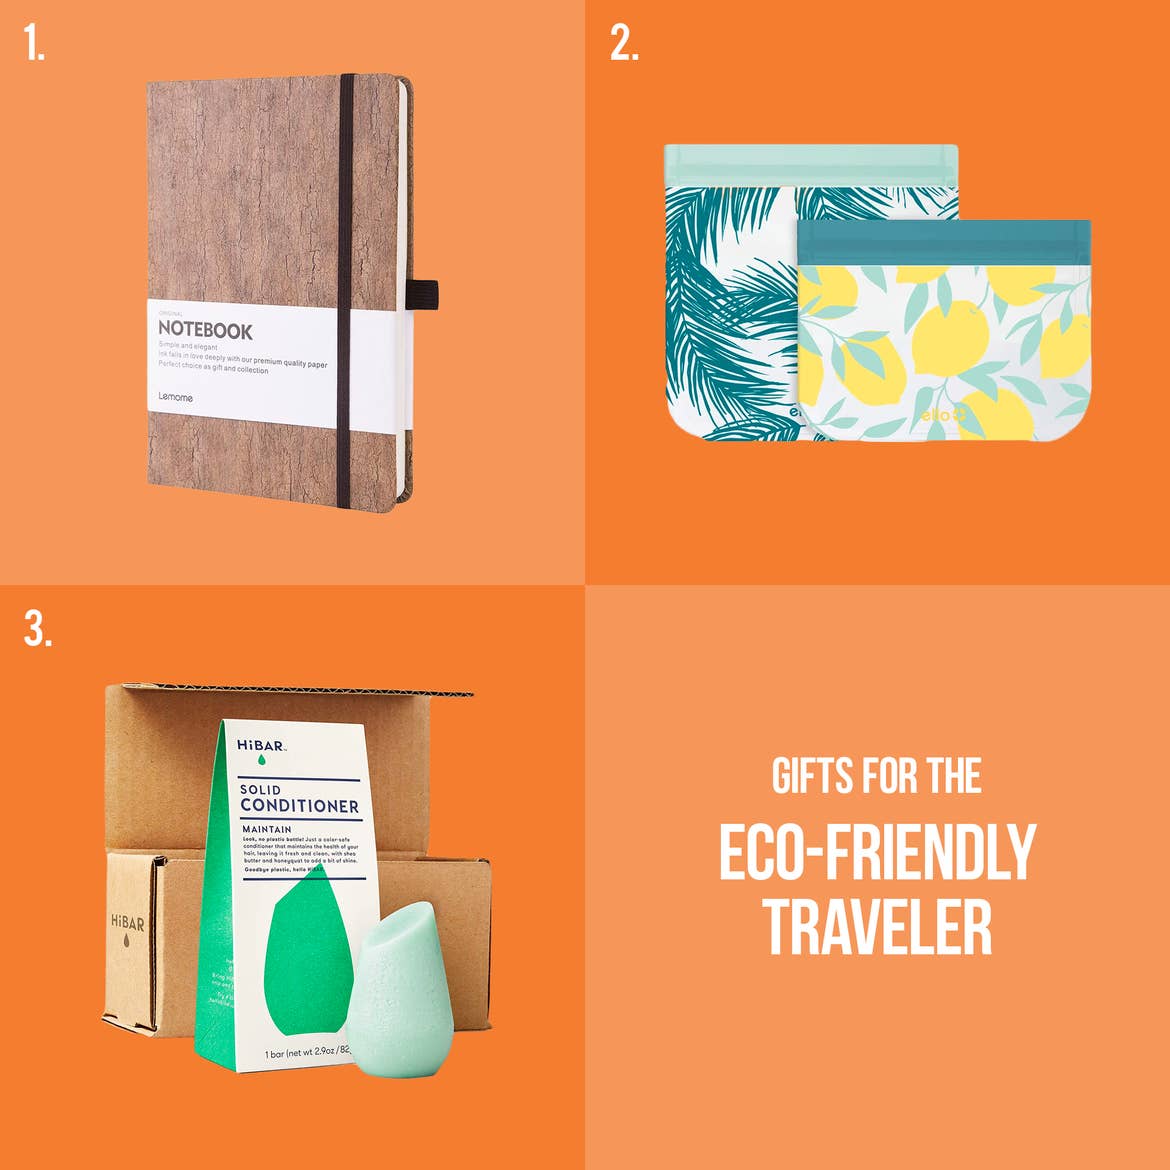 A natural, cork notebook, reusable resealable baggies, and a shampoo bar image are placed on top of an orange graphic that reads, 'Gifts for the Eco-Friendly Traveler.'